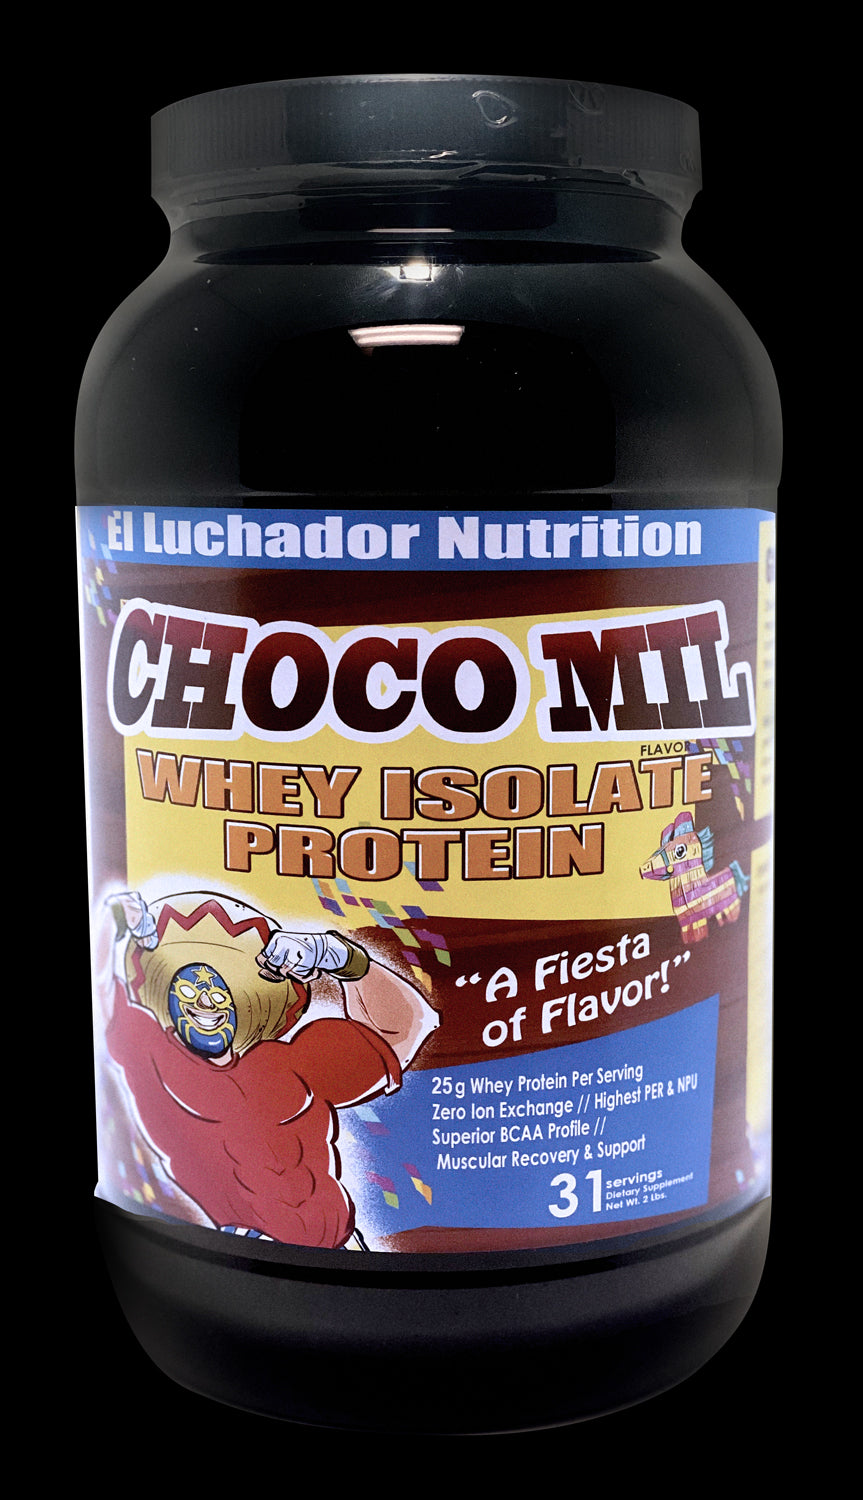 'Choco Mil' Whey Isolate Protein